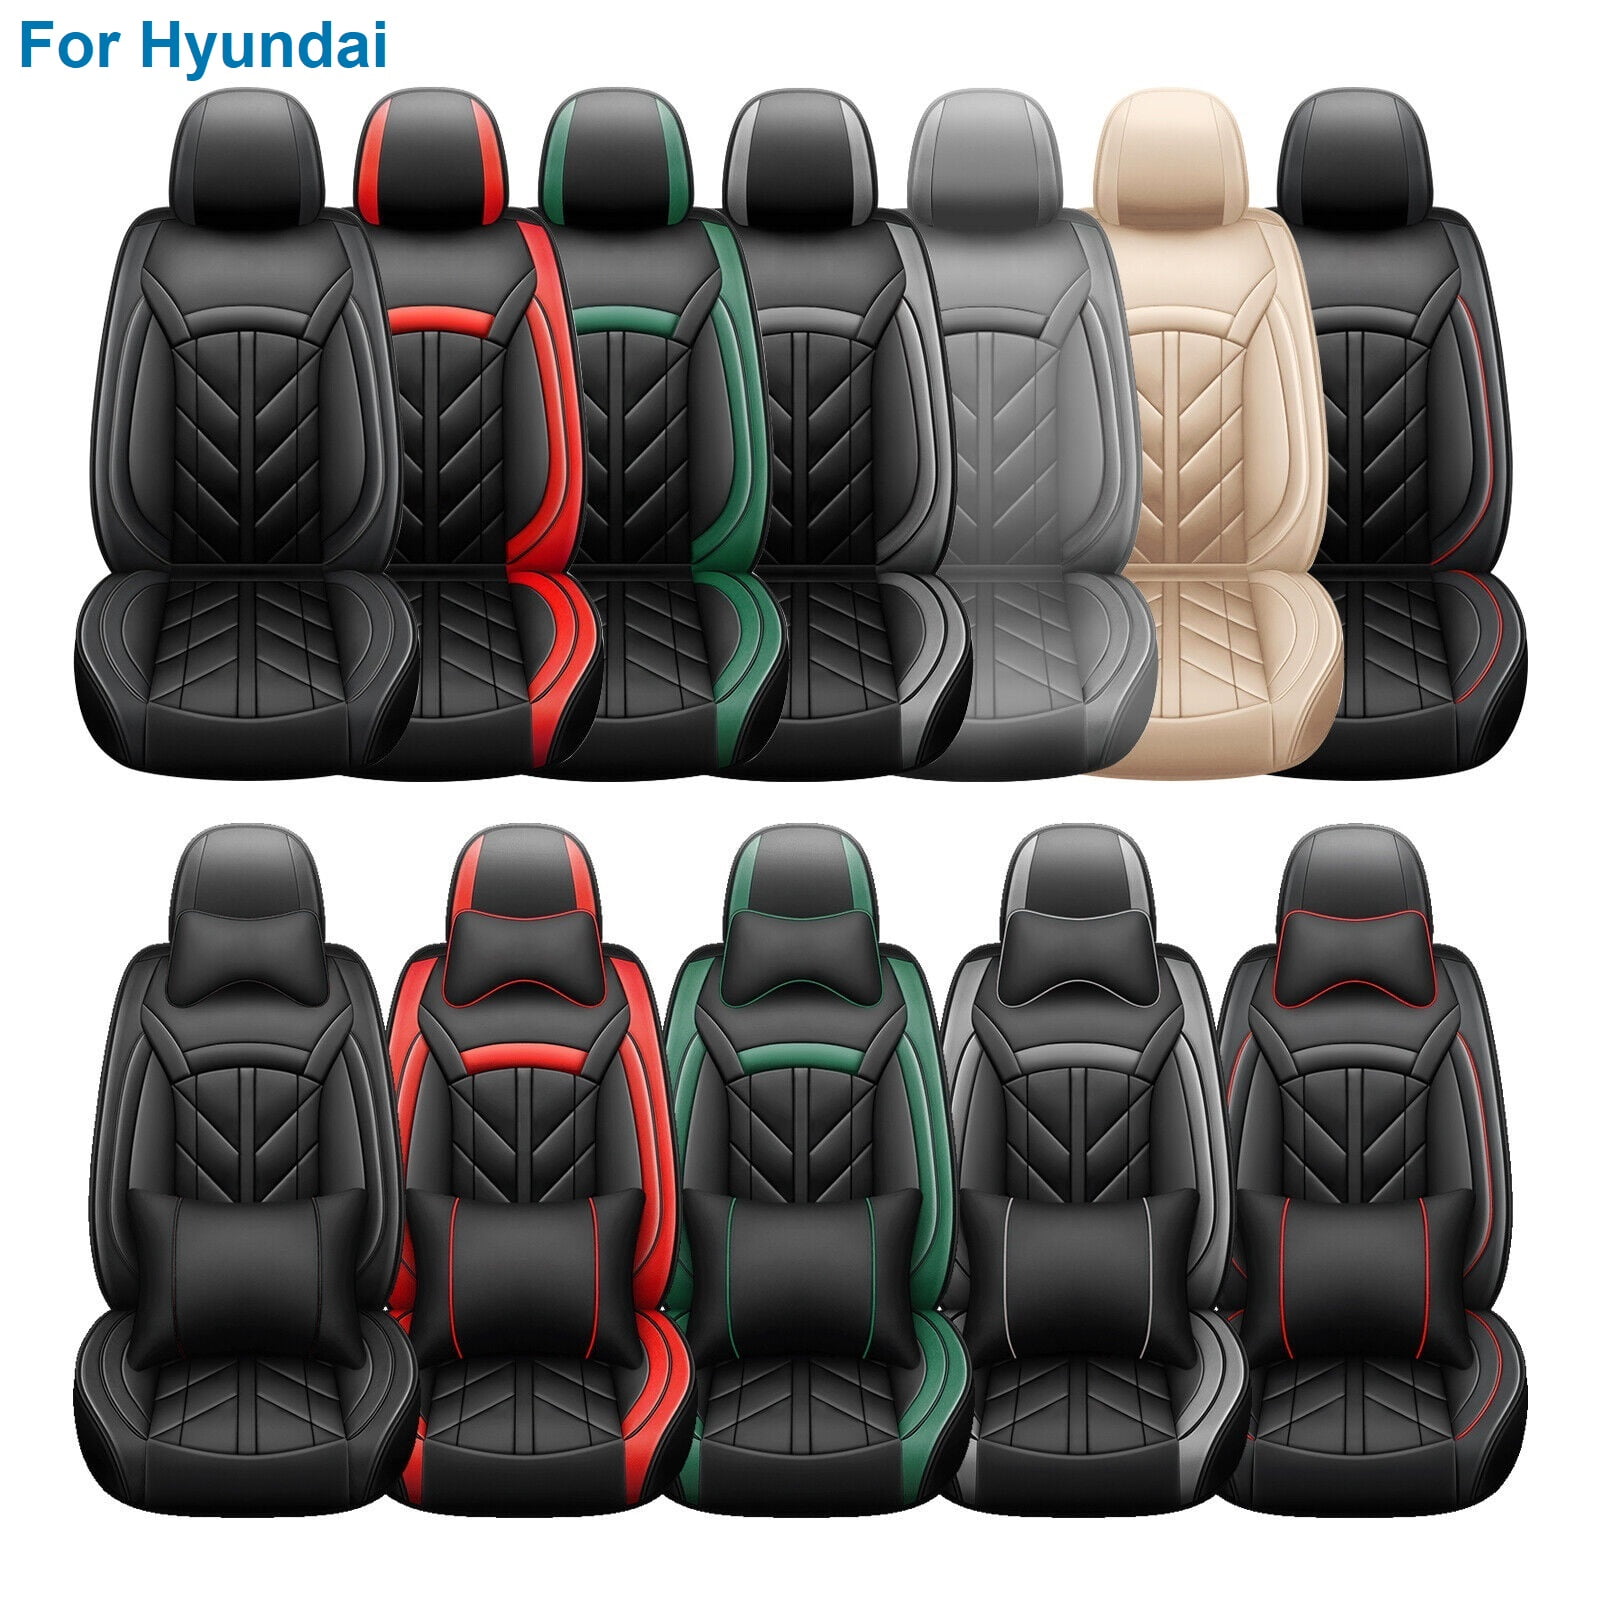 For Hyundai Car Seat Covers, Wear-resistant 5 Seats Auto Cushion Protector,  Front Rear Seat Full Set for Elantra Tucson Sonata Palisade Veloster